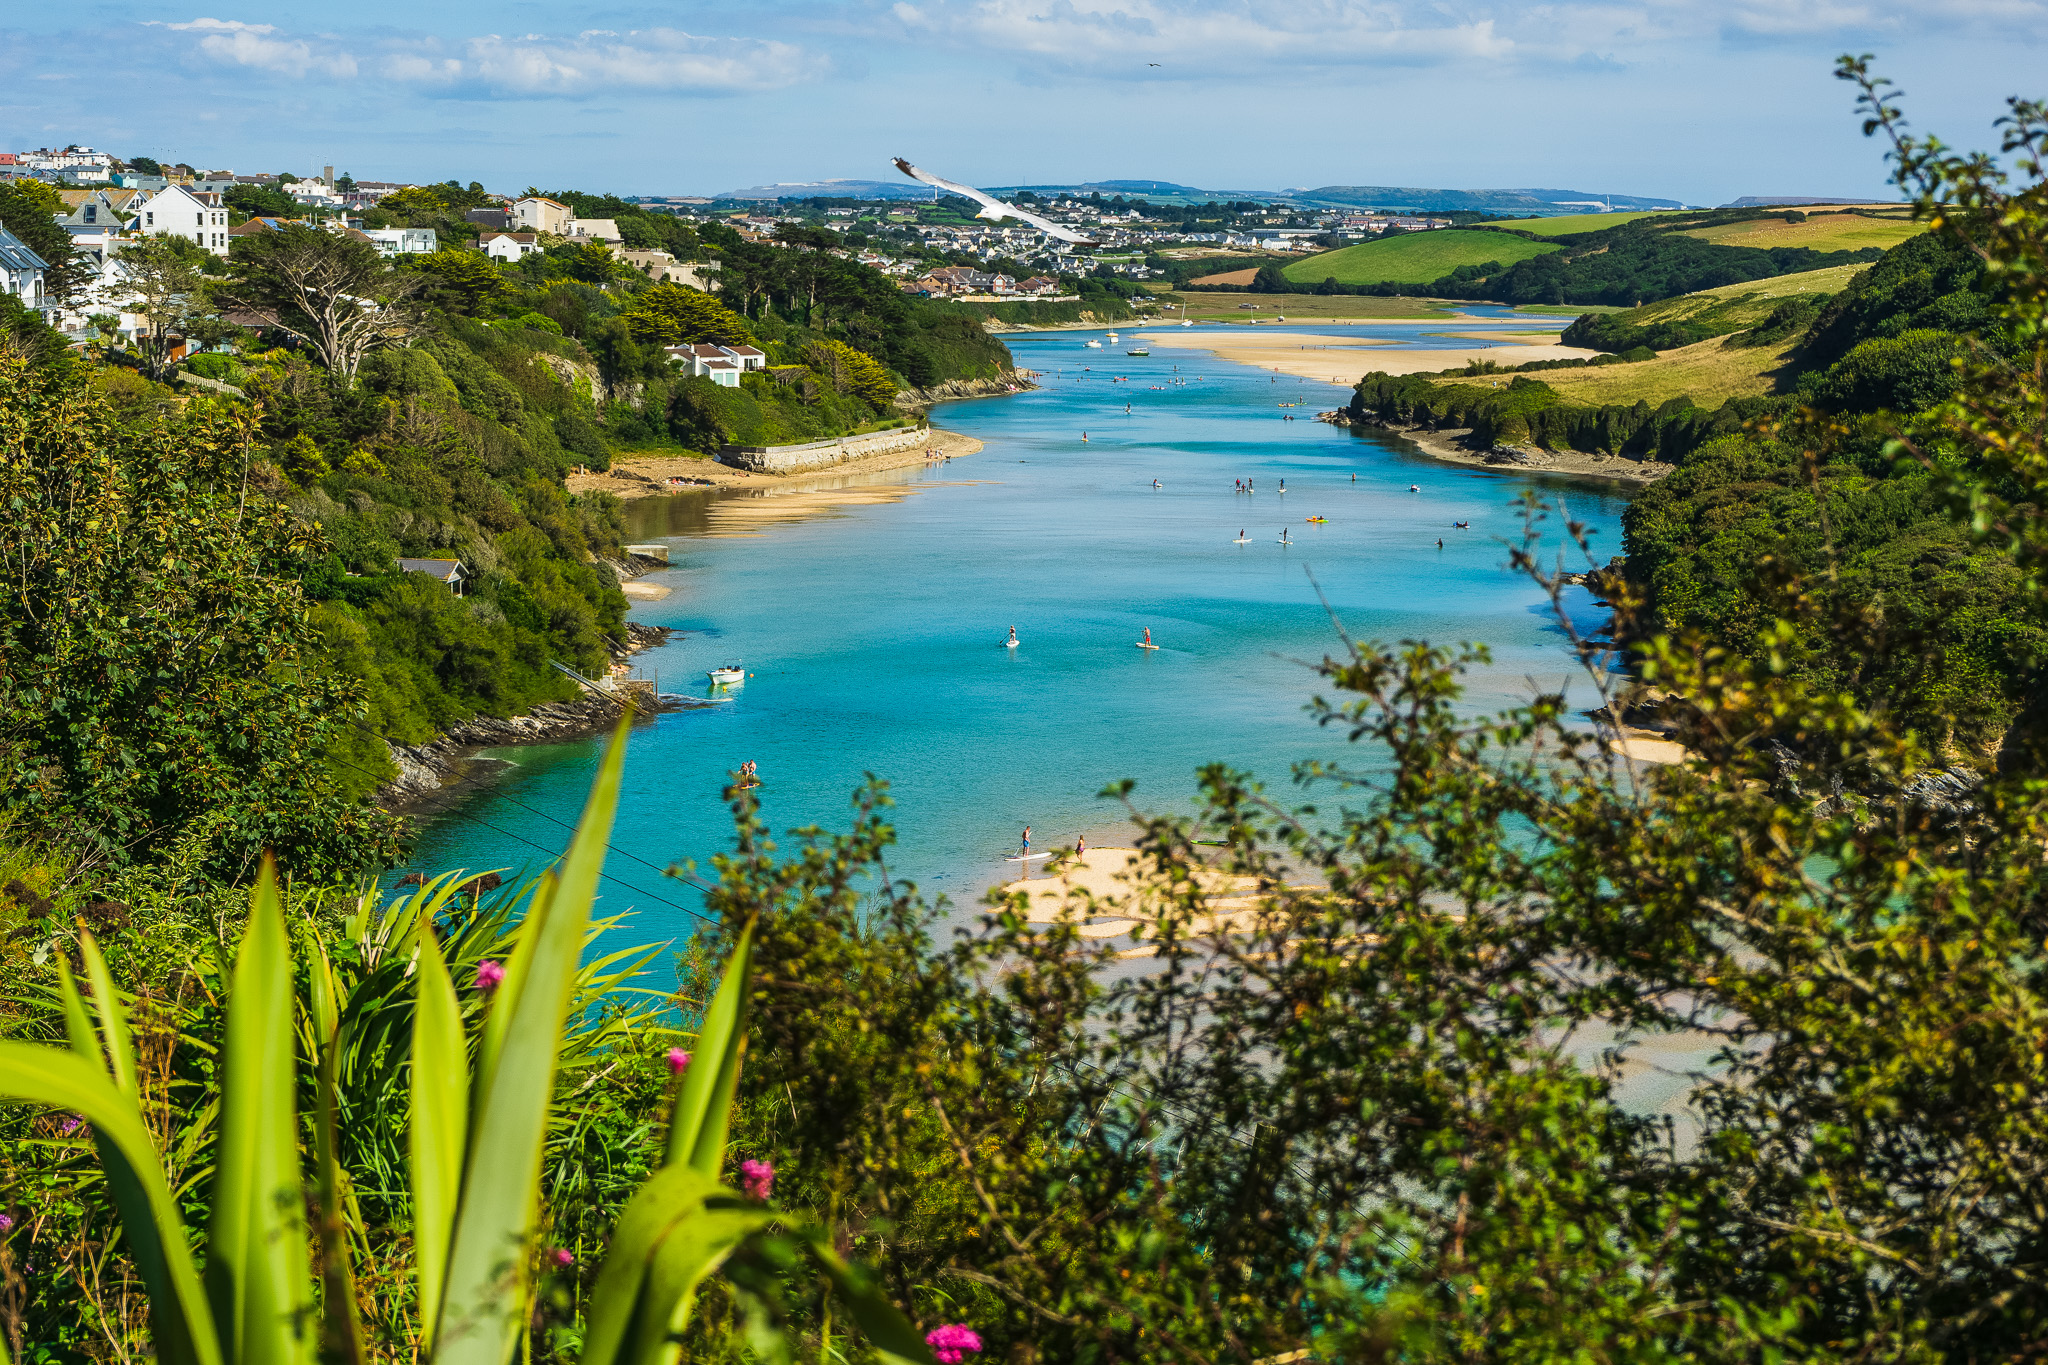 A photo of the bright aqua water of the Gannel in Newquay taken from higher up between bright green bushes and pink flowers. People are paddleboarding, swimming and in little boats along the calm water at high tide.